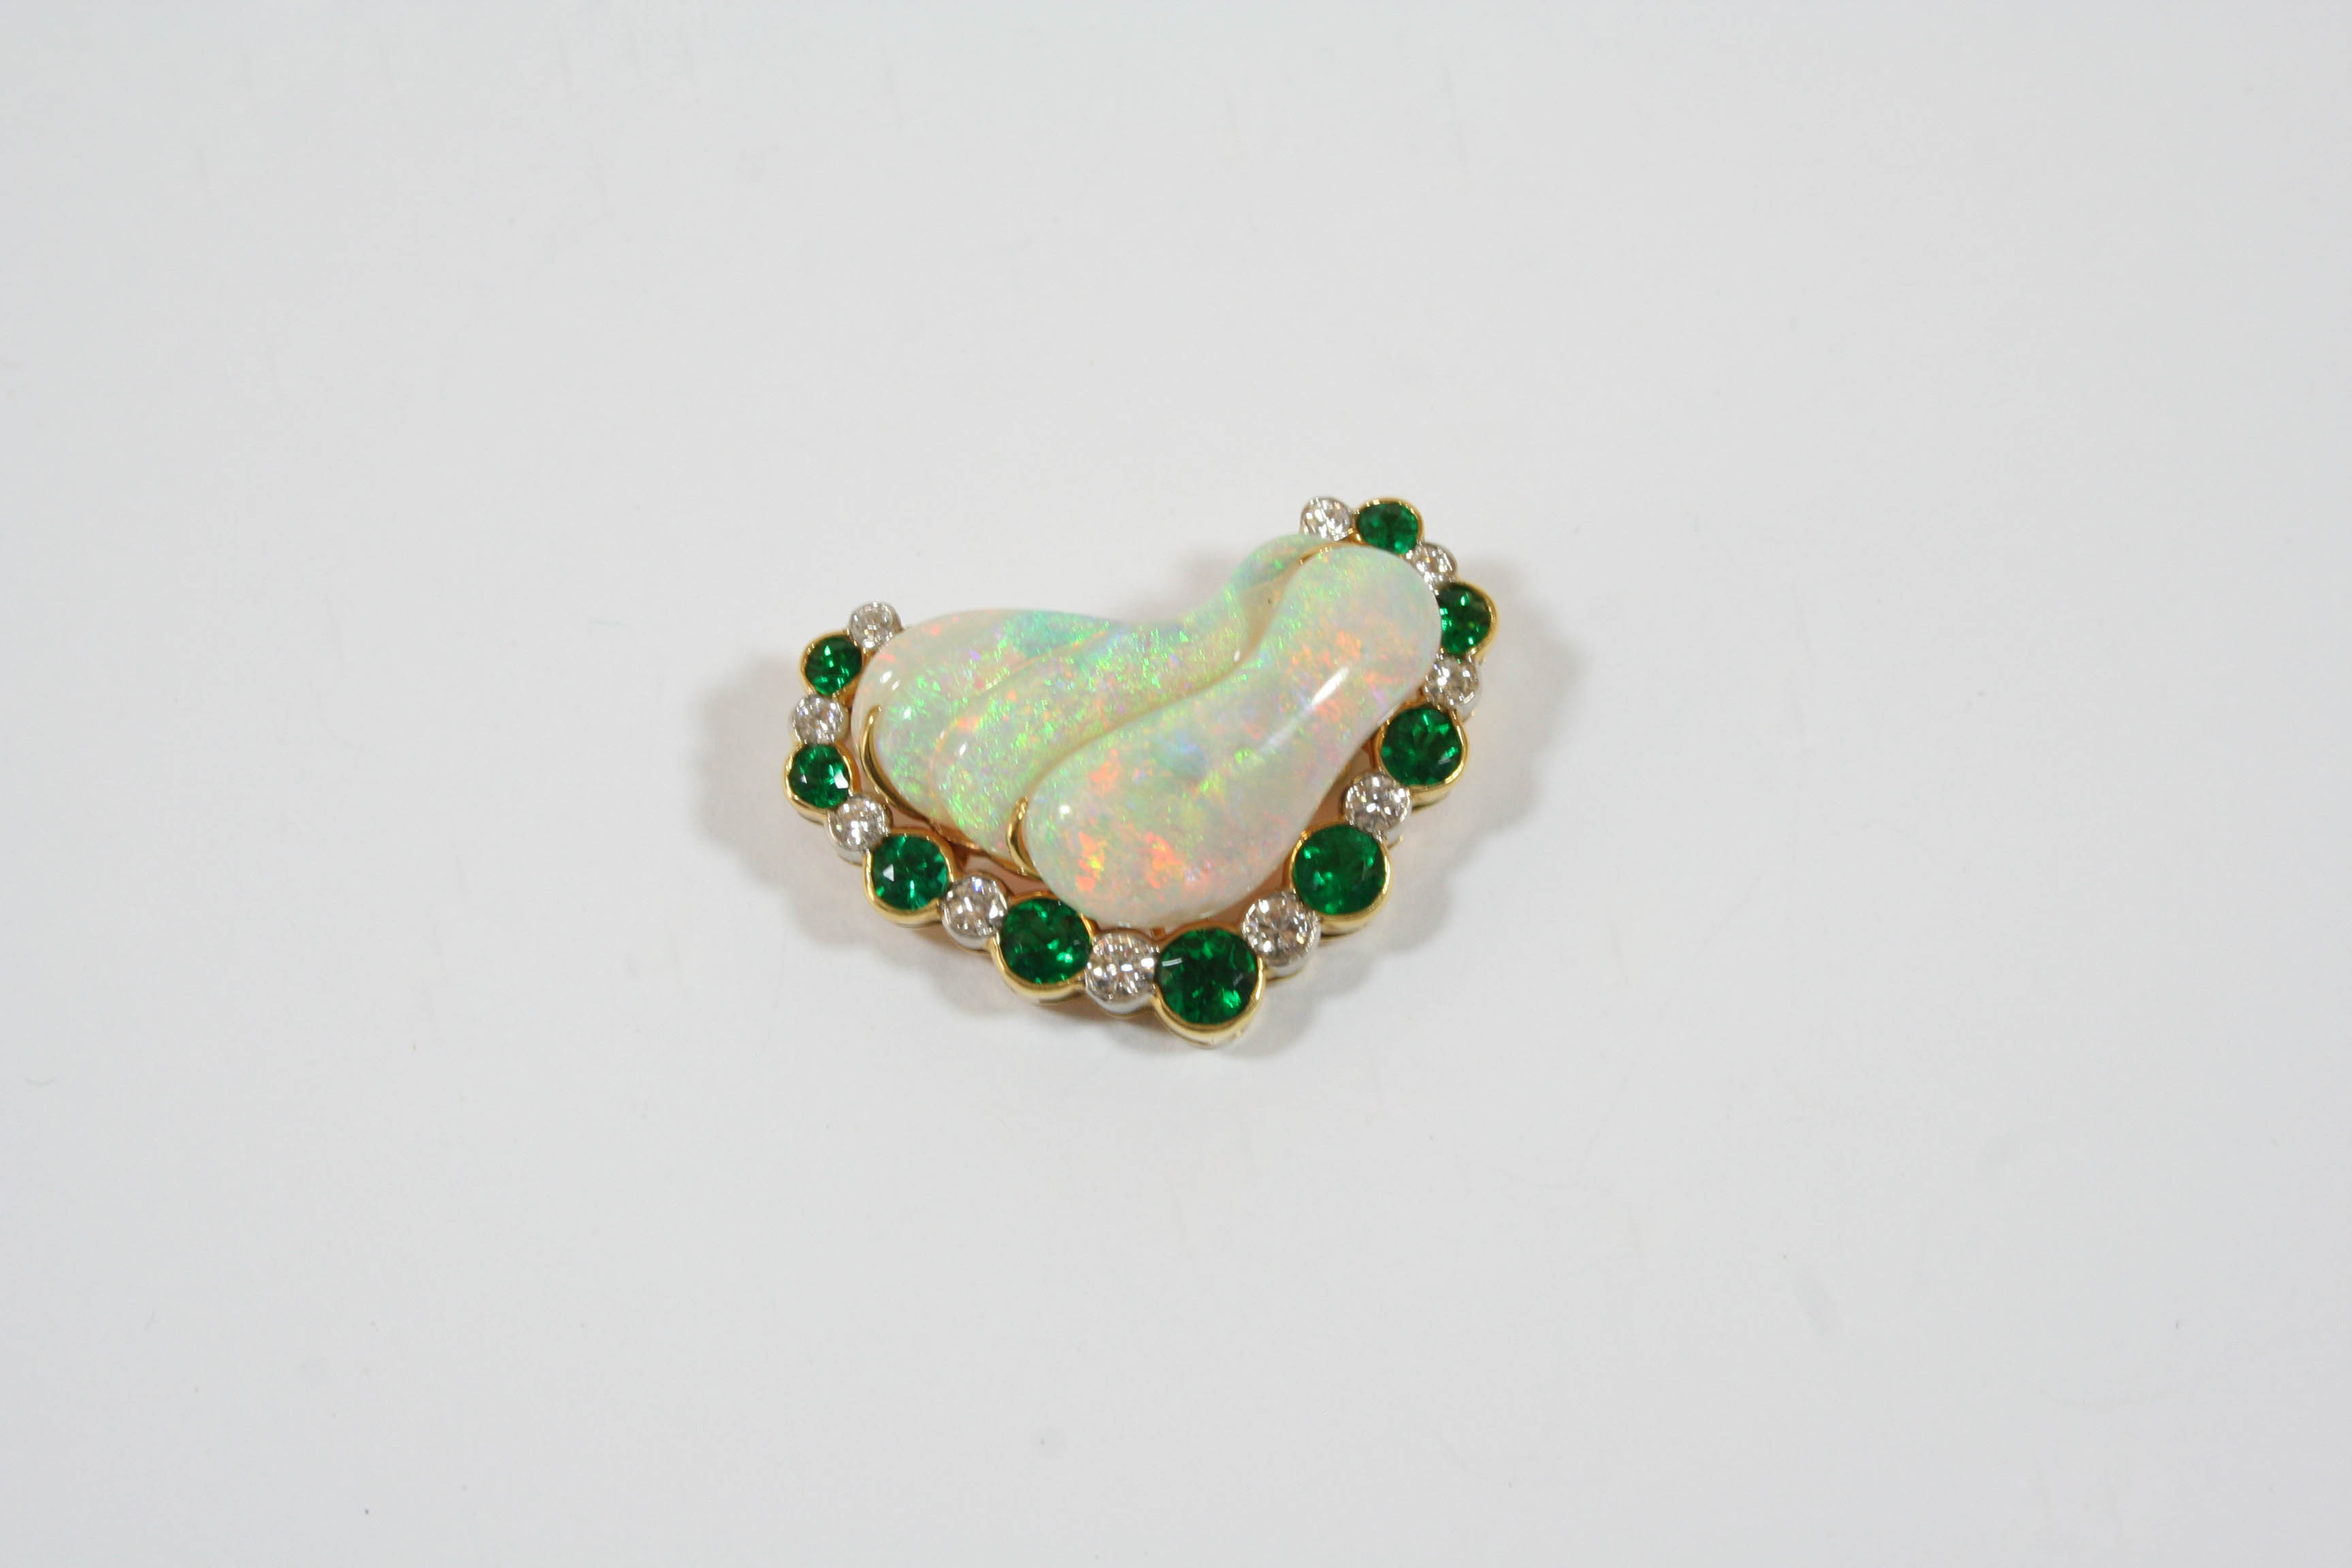 AN OPAL, EMERALD AND DIAMOND BROOCH formed with three overlapping sections of opal within a surround